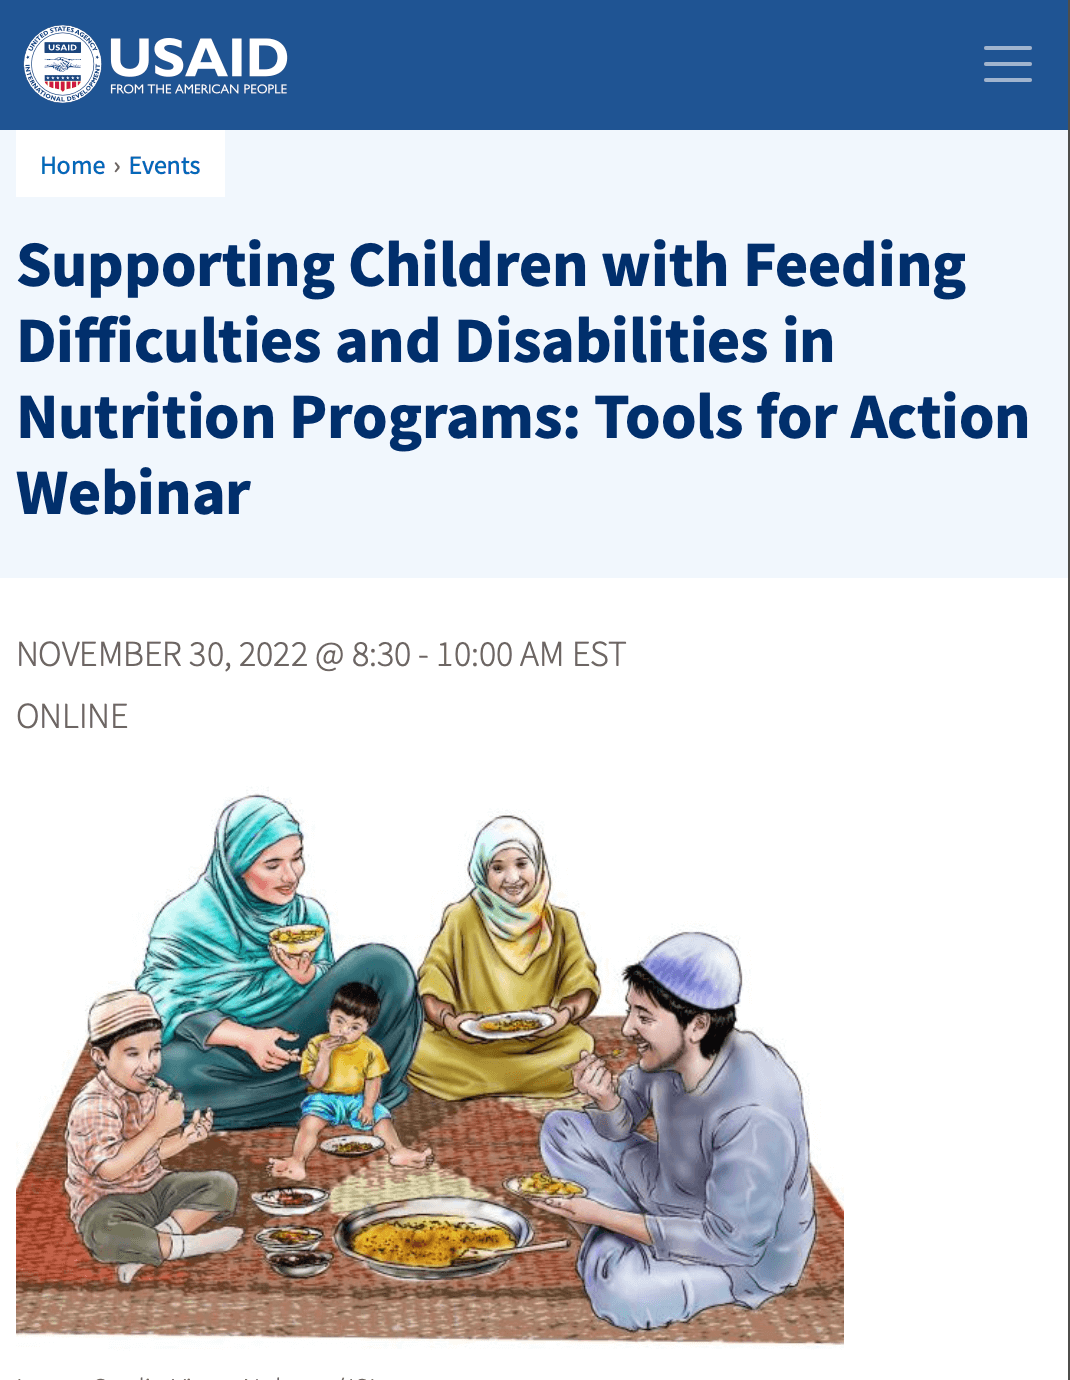 Screenshot of the webpage for "Supporting Children with Feeding Difficulties and Disabilities in Nutrition Programs: Tools for Action Webinar"